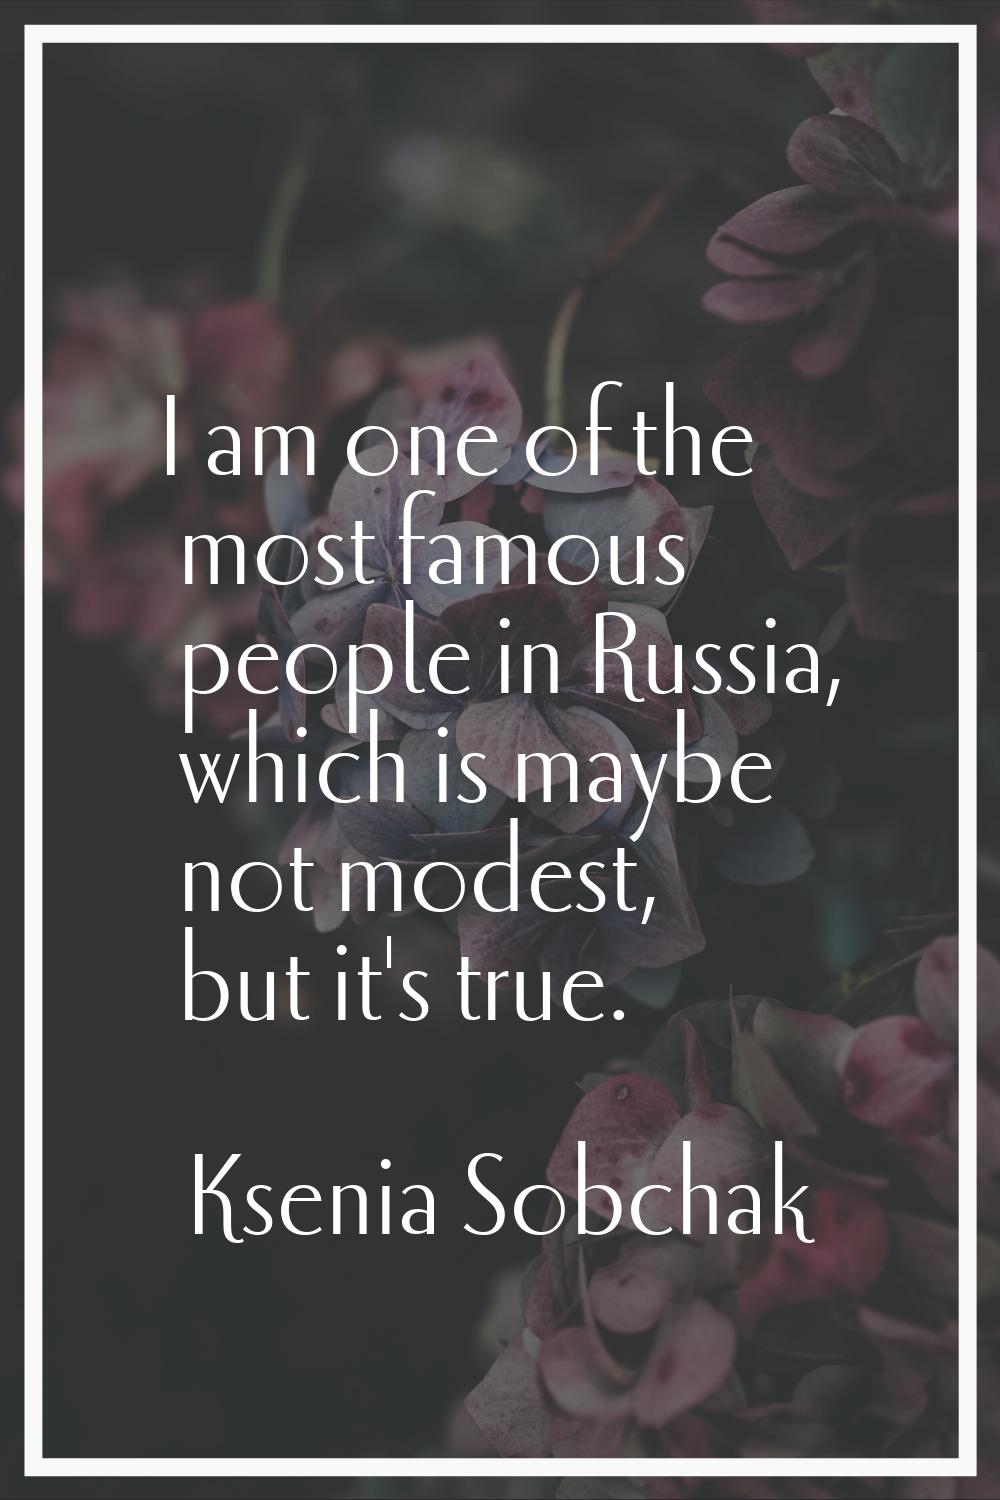 I am one of the most famous people in Russia, which is maybe not modest, but it's true.